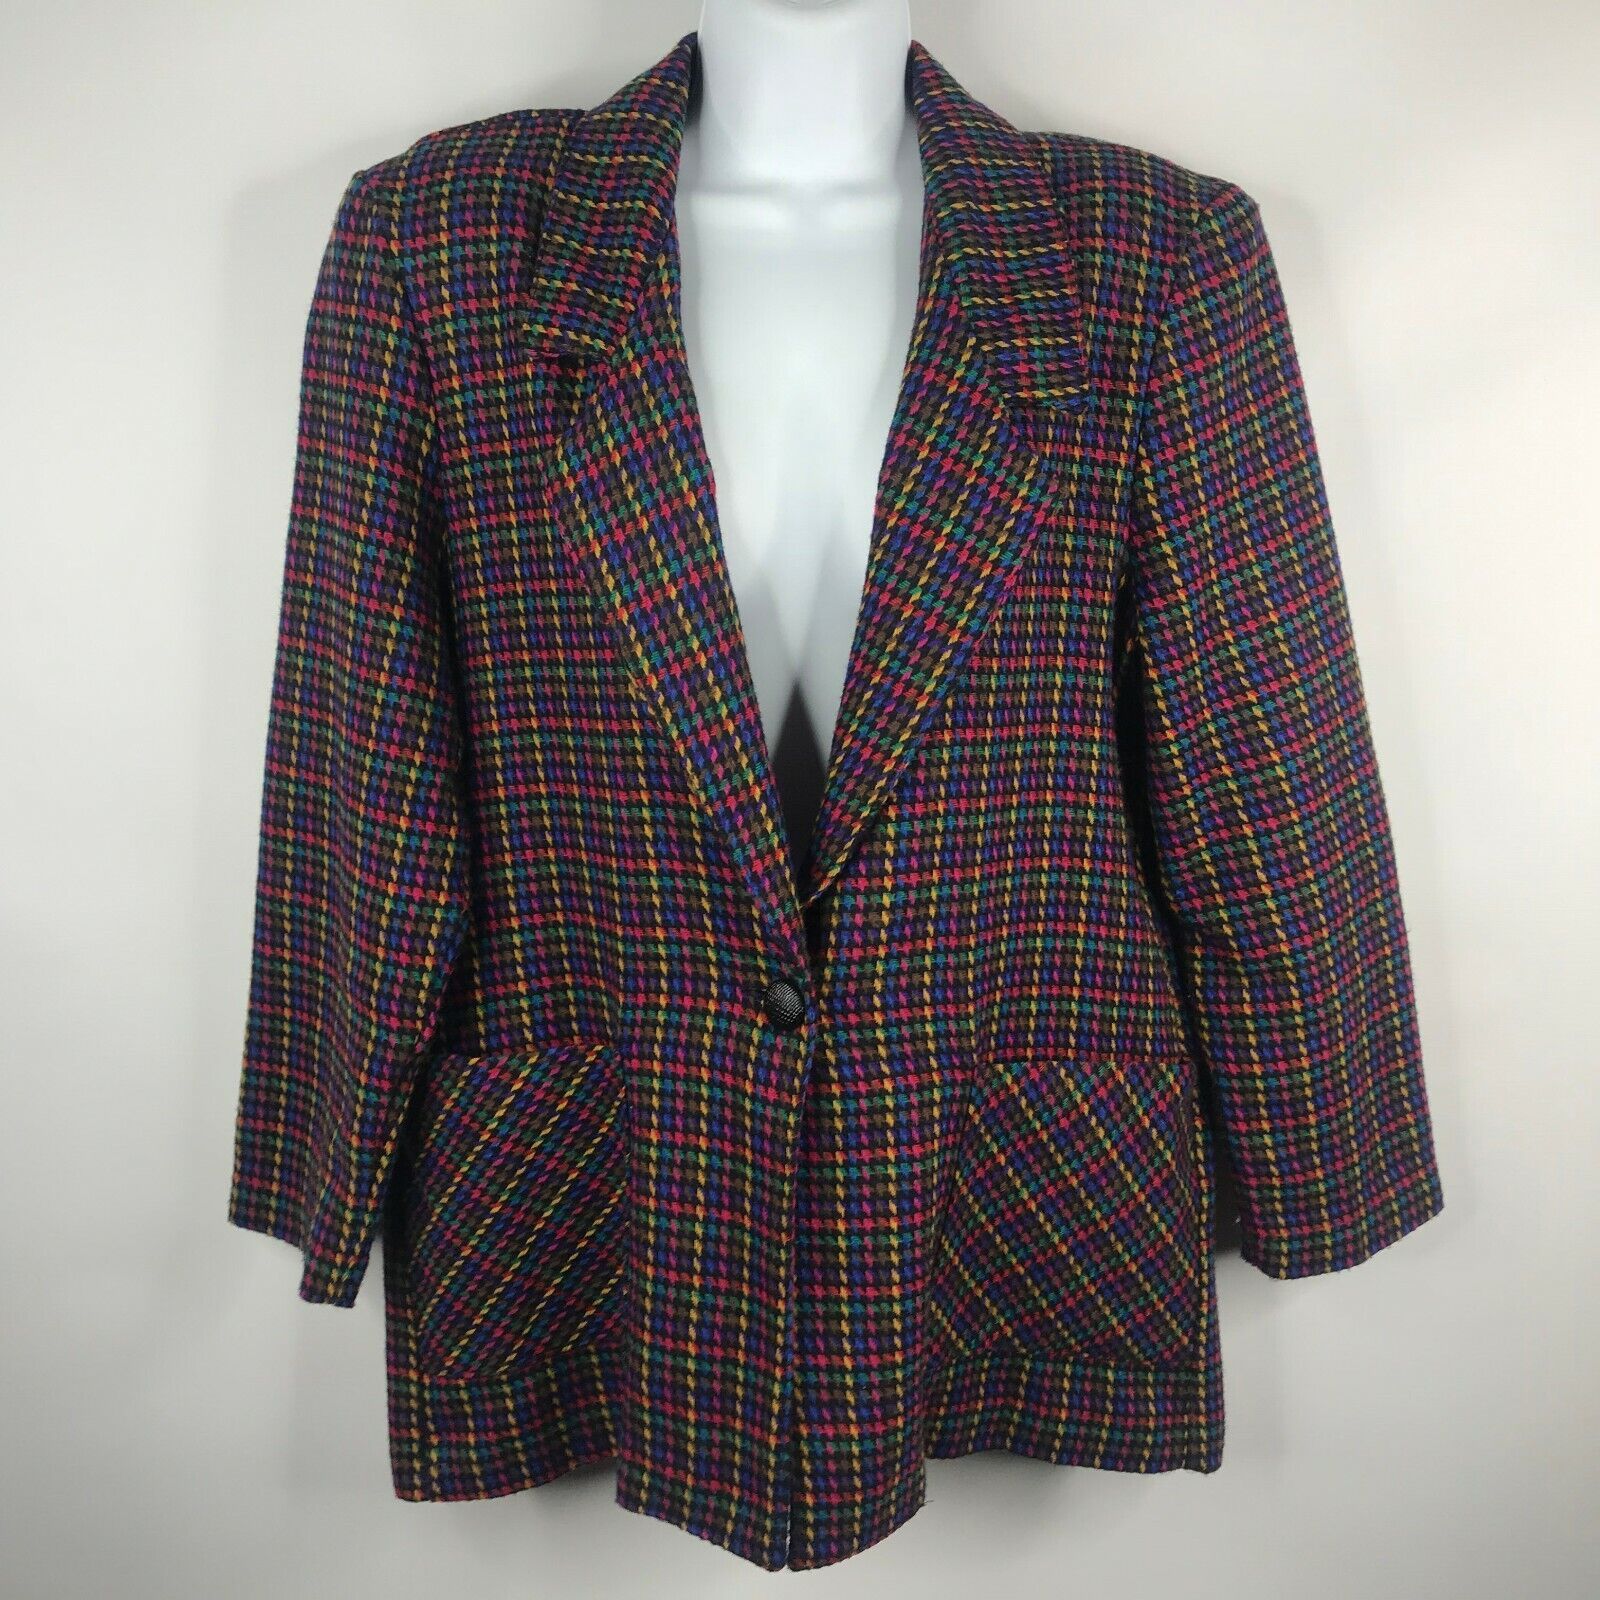 Vintage 80s Blair Rainbow Houndstooth Check Wool Blend Blazer Size XL / US 12-14 / IT 48-50 - 1 Preview